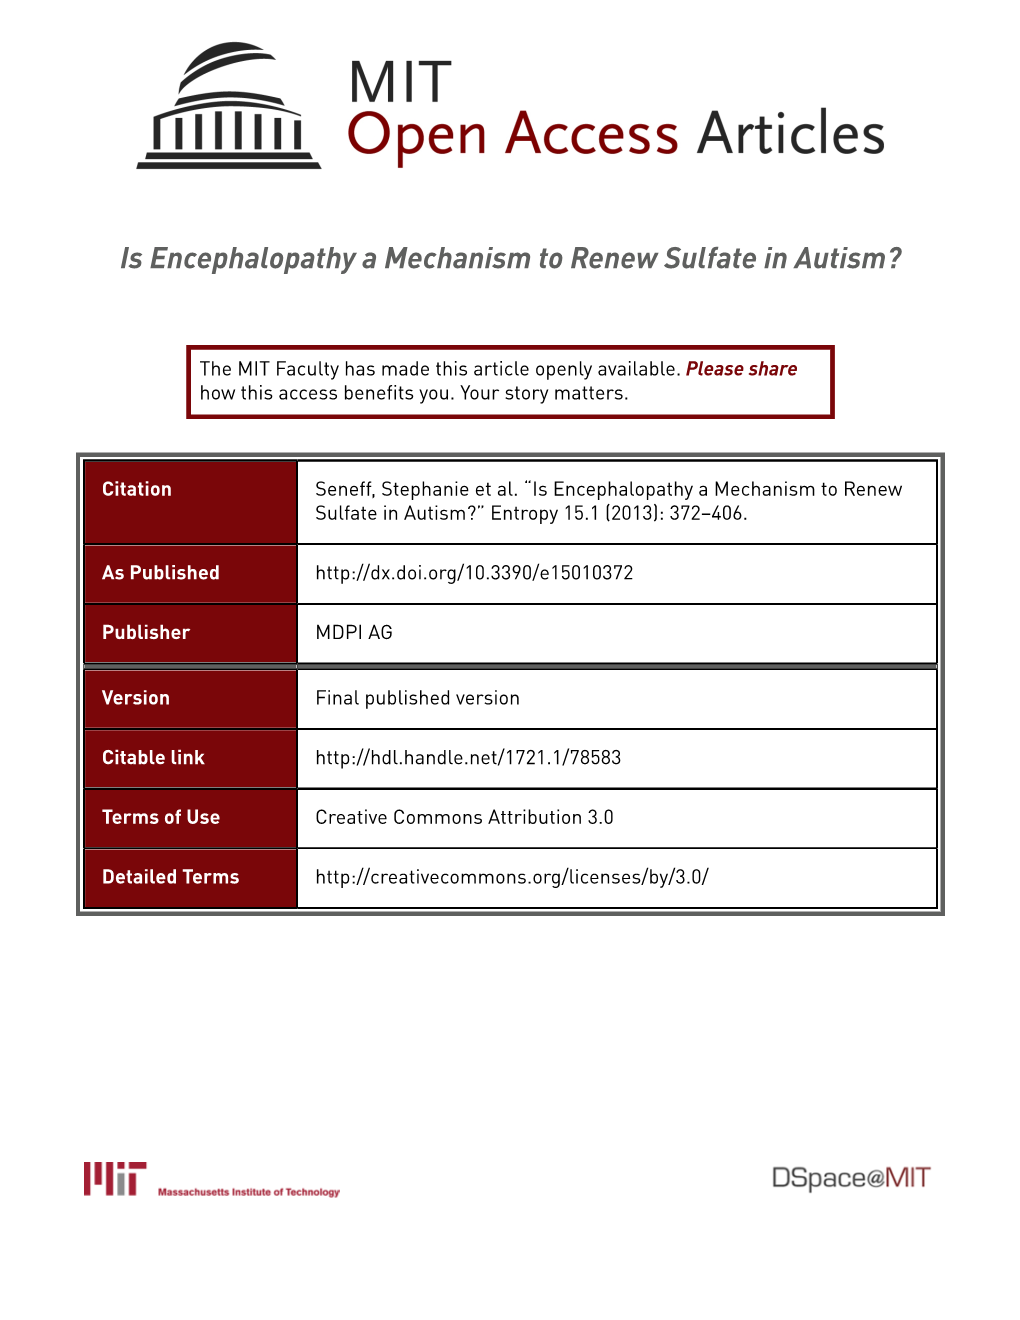 Is Encephalopathy a Mechanism to Renew Sulfate in Autism?